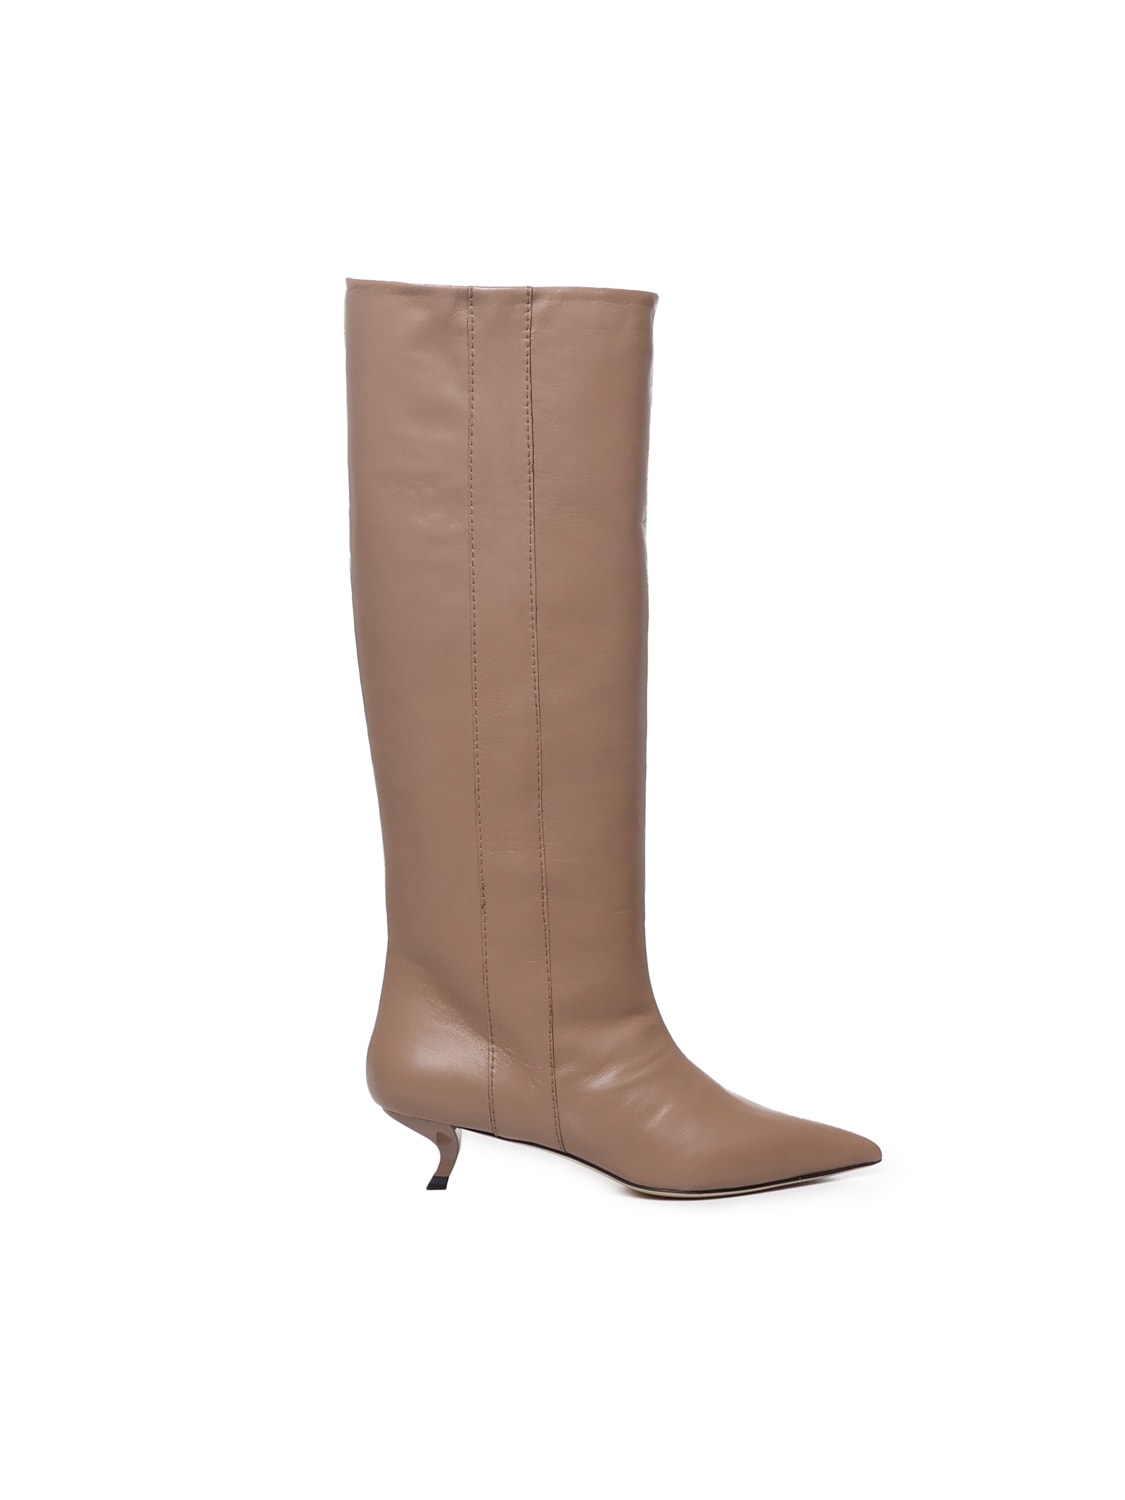 Alchimia Low Heel Leather Boots In Nude